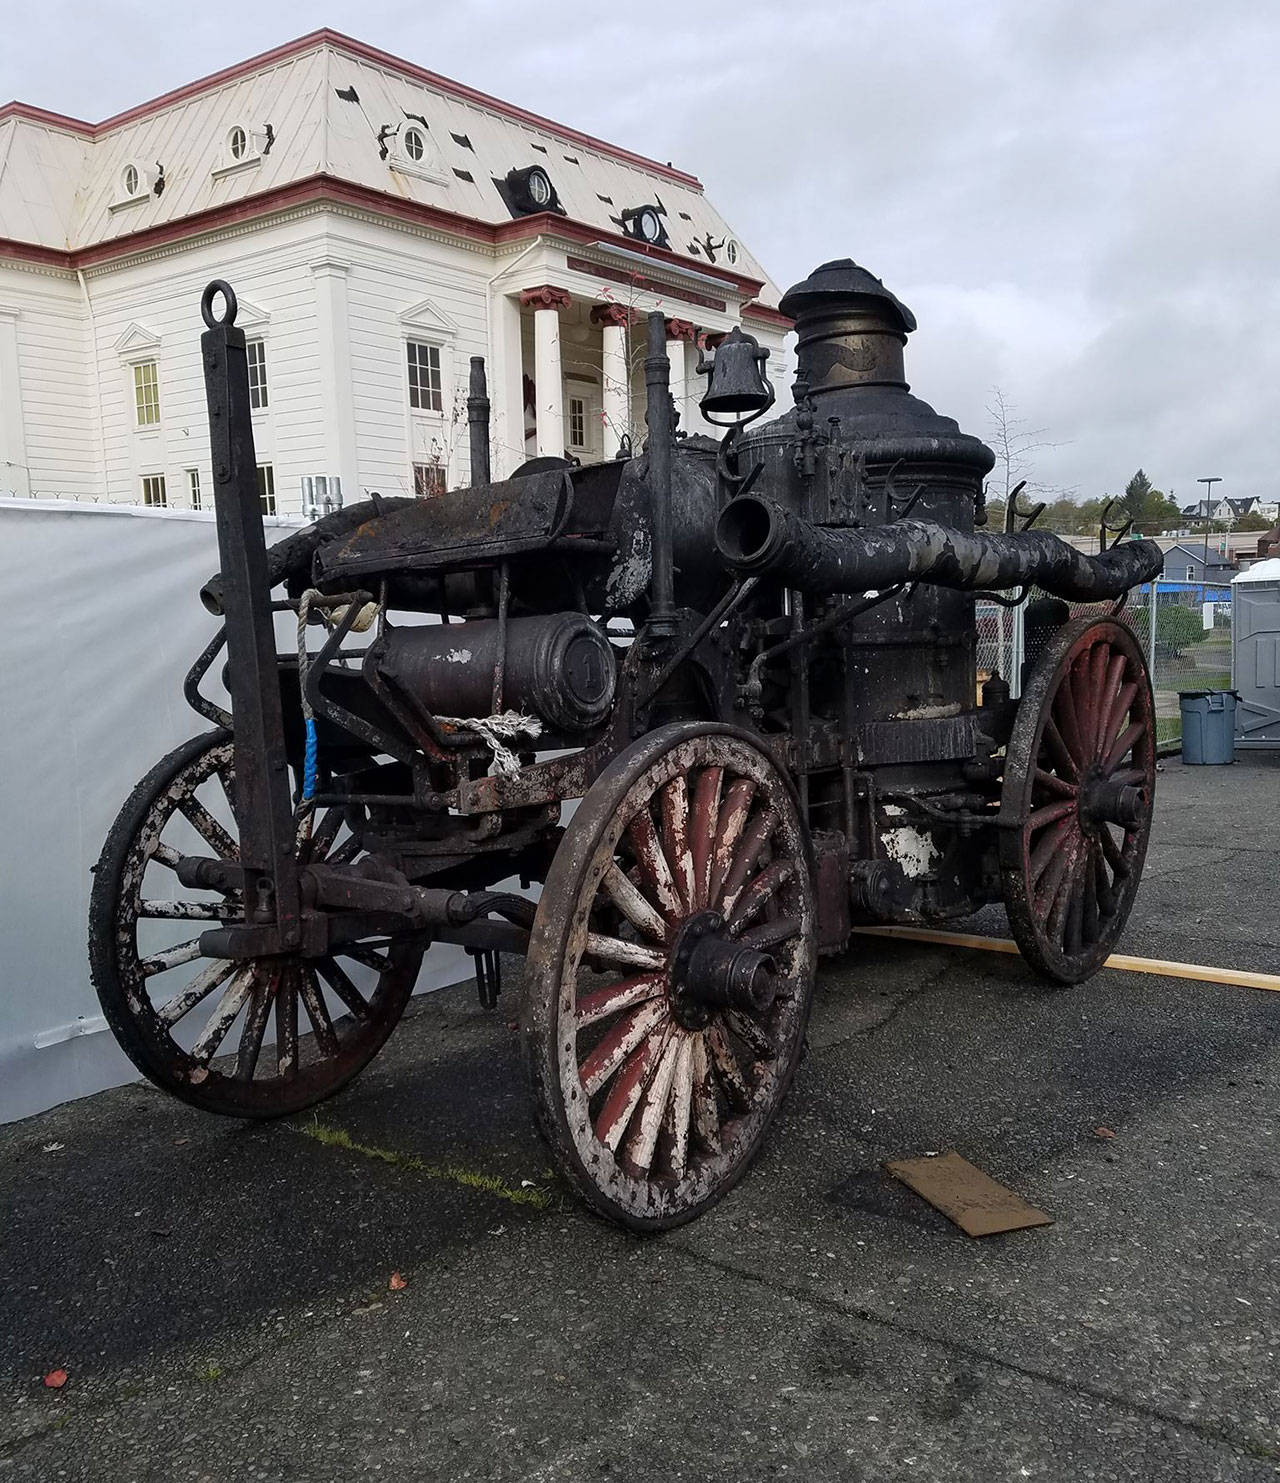 The 1902 Metropolitan Steam Pumper was recovered after the Aberdeen Armory was gutted by fire in June, 2018. It was one of the first modern pieces of firefighting equipment purchased in Aberdeen prior to the city’s Black Friday Fire on Oct. 16, 1903. (Courtesy Dave Morris)